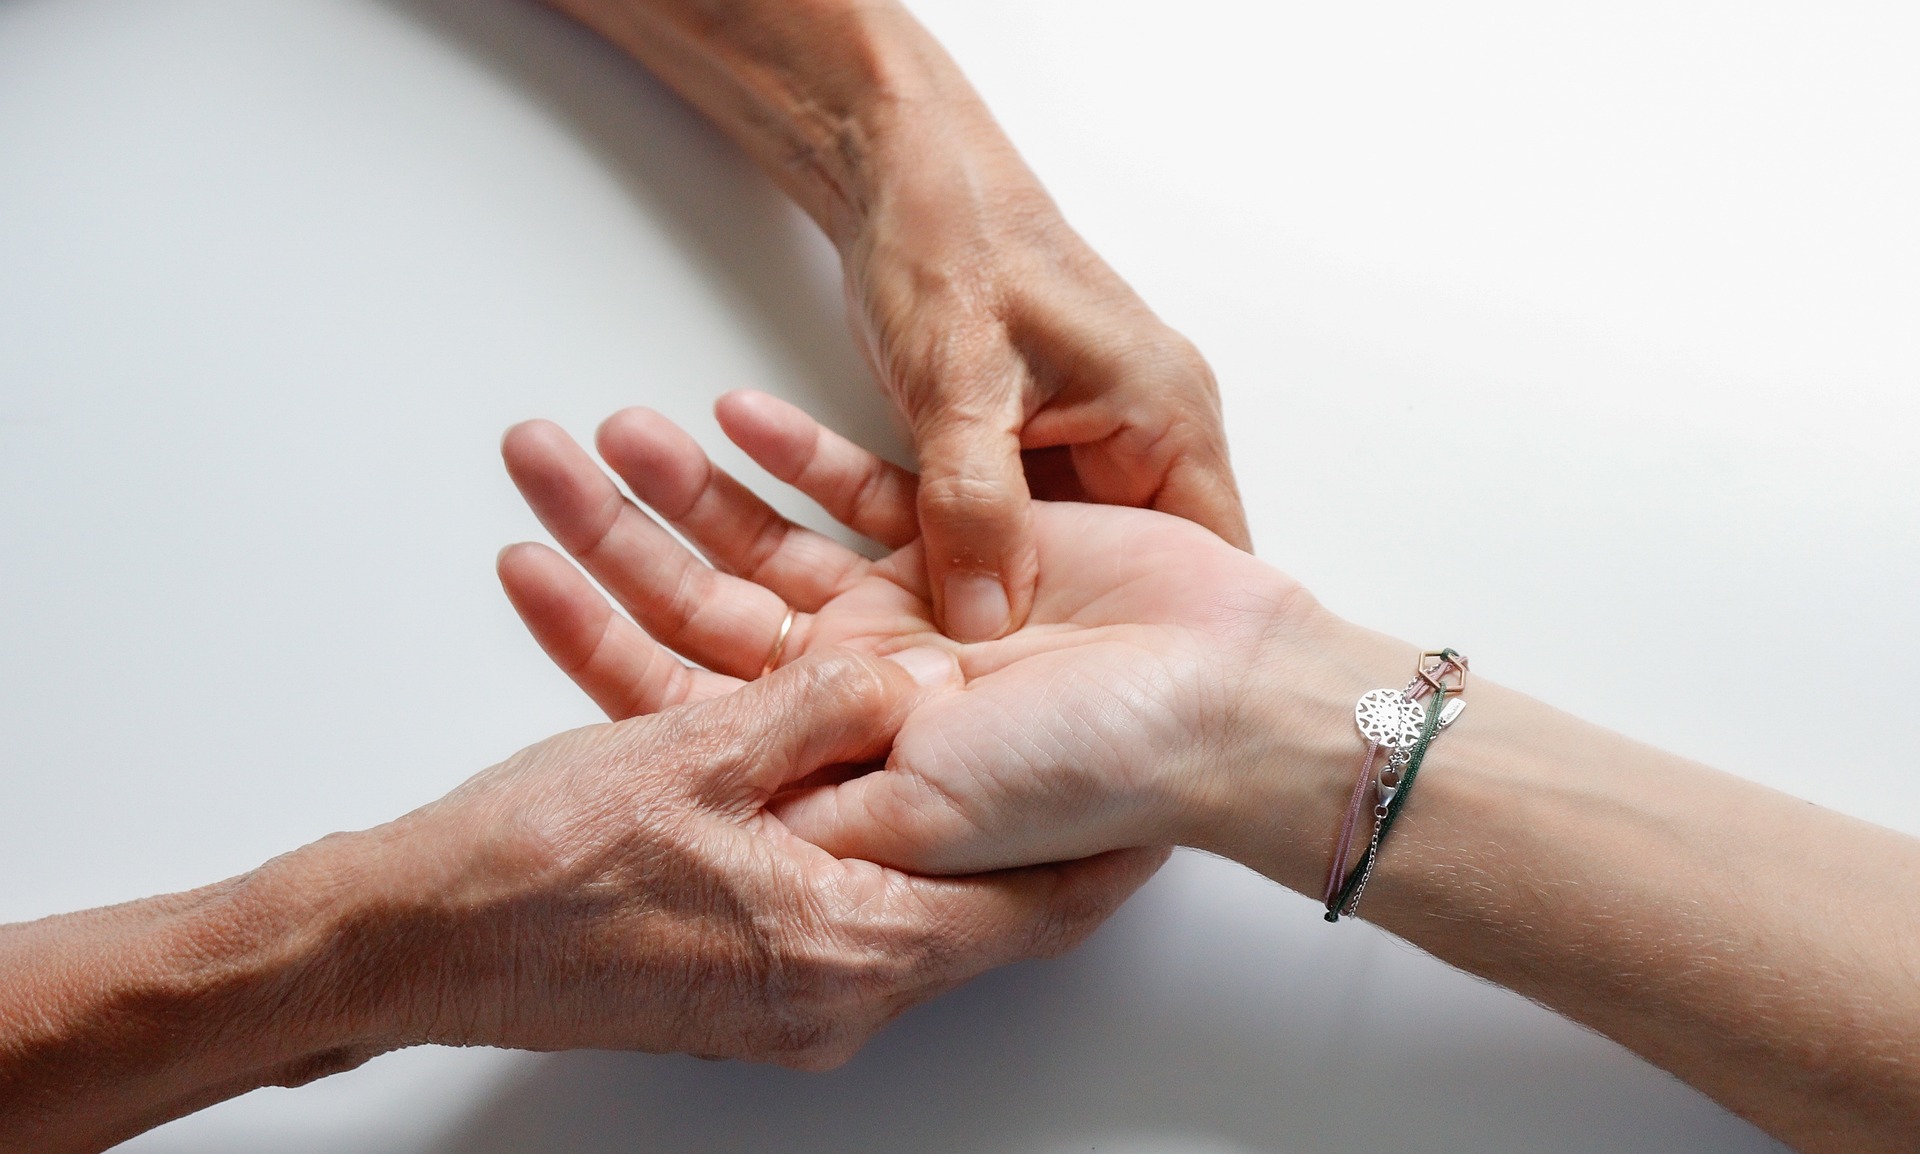 Hand Exercises For Stroke Recovery